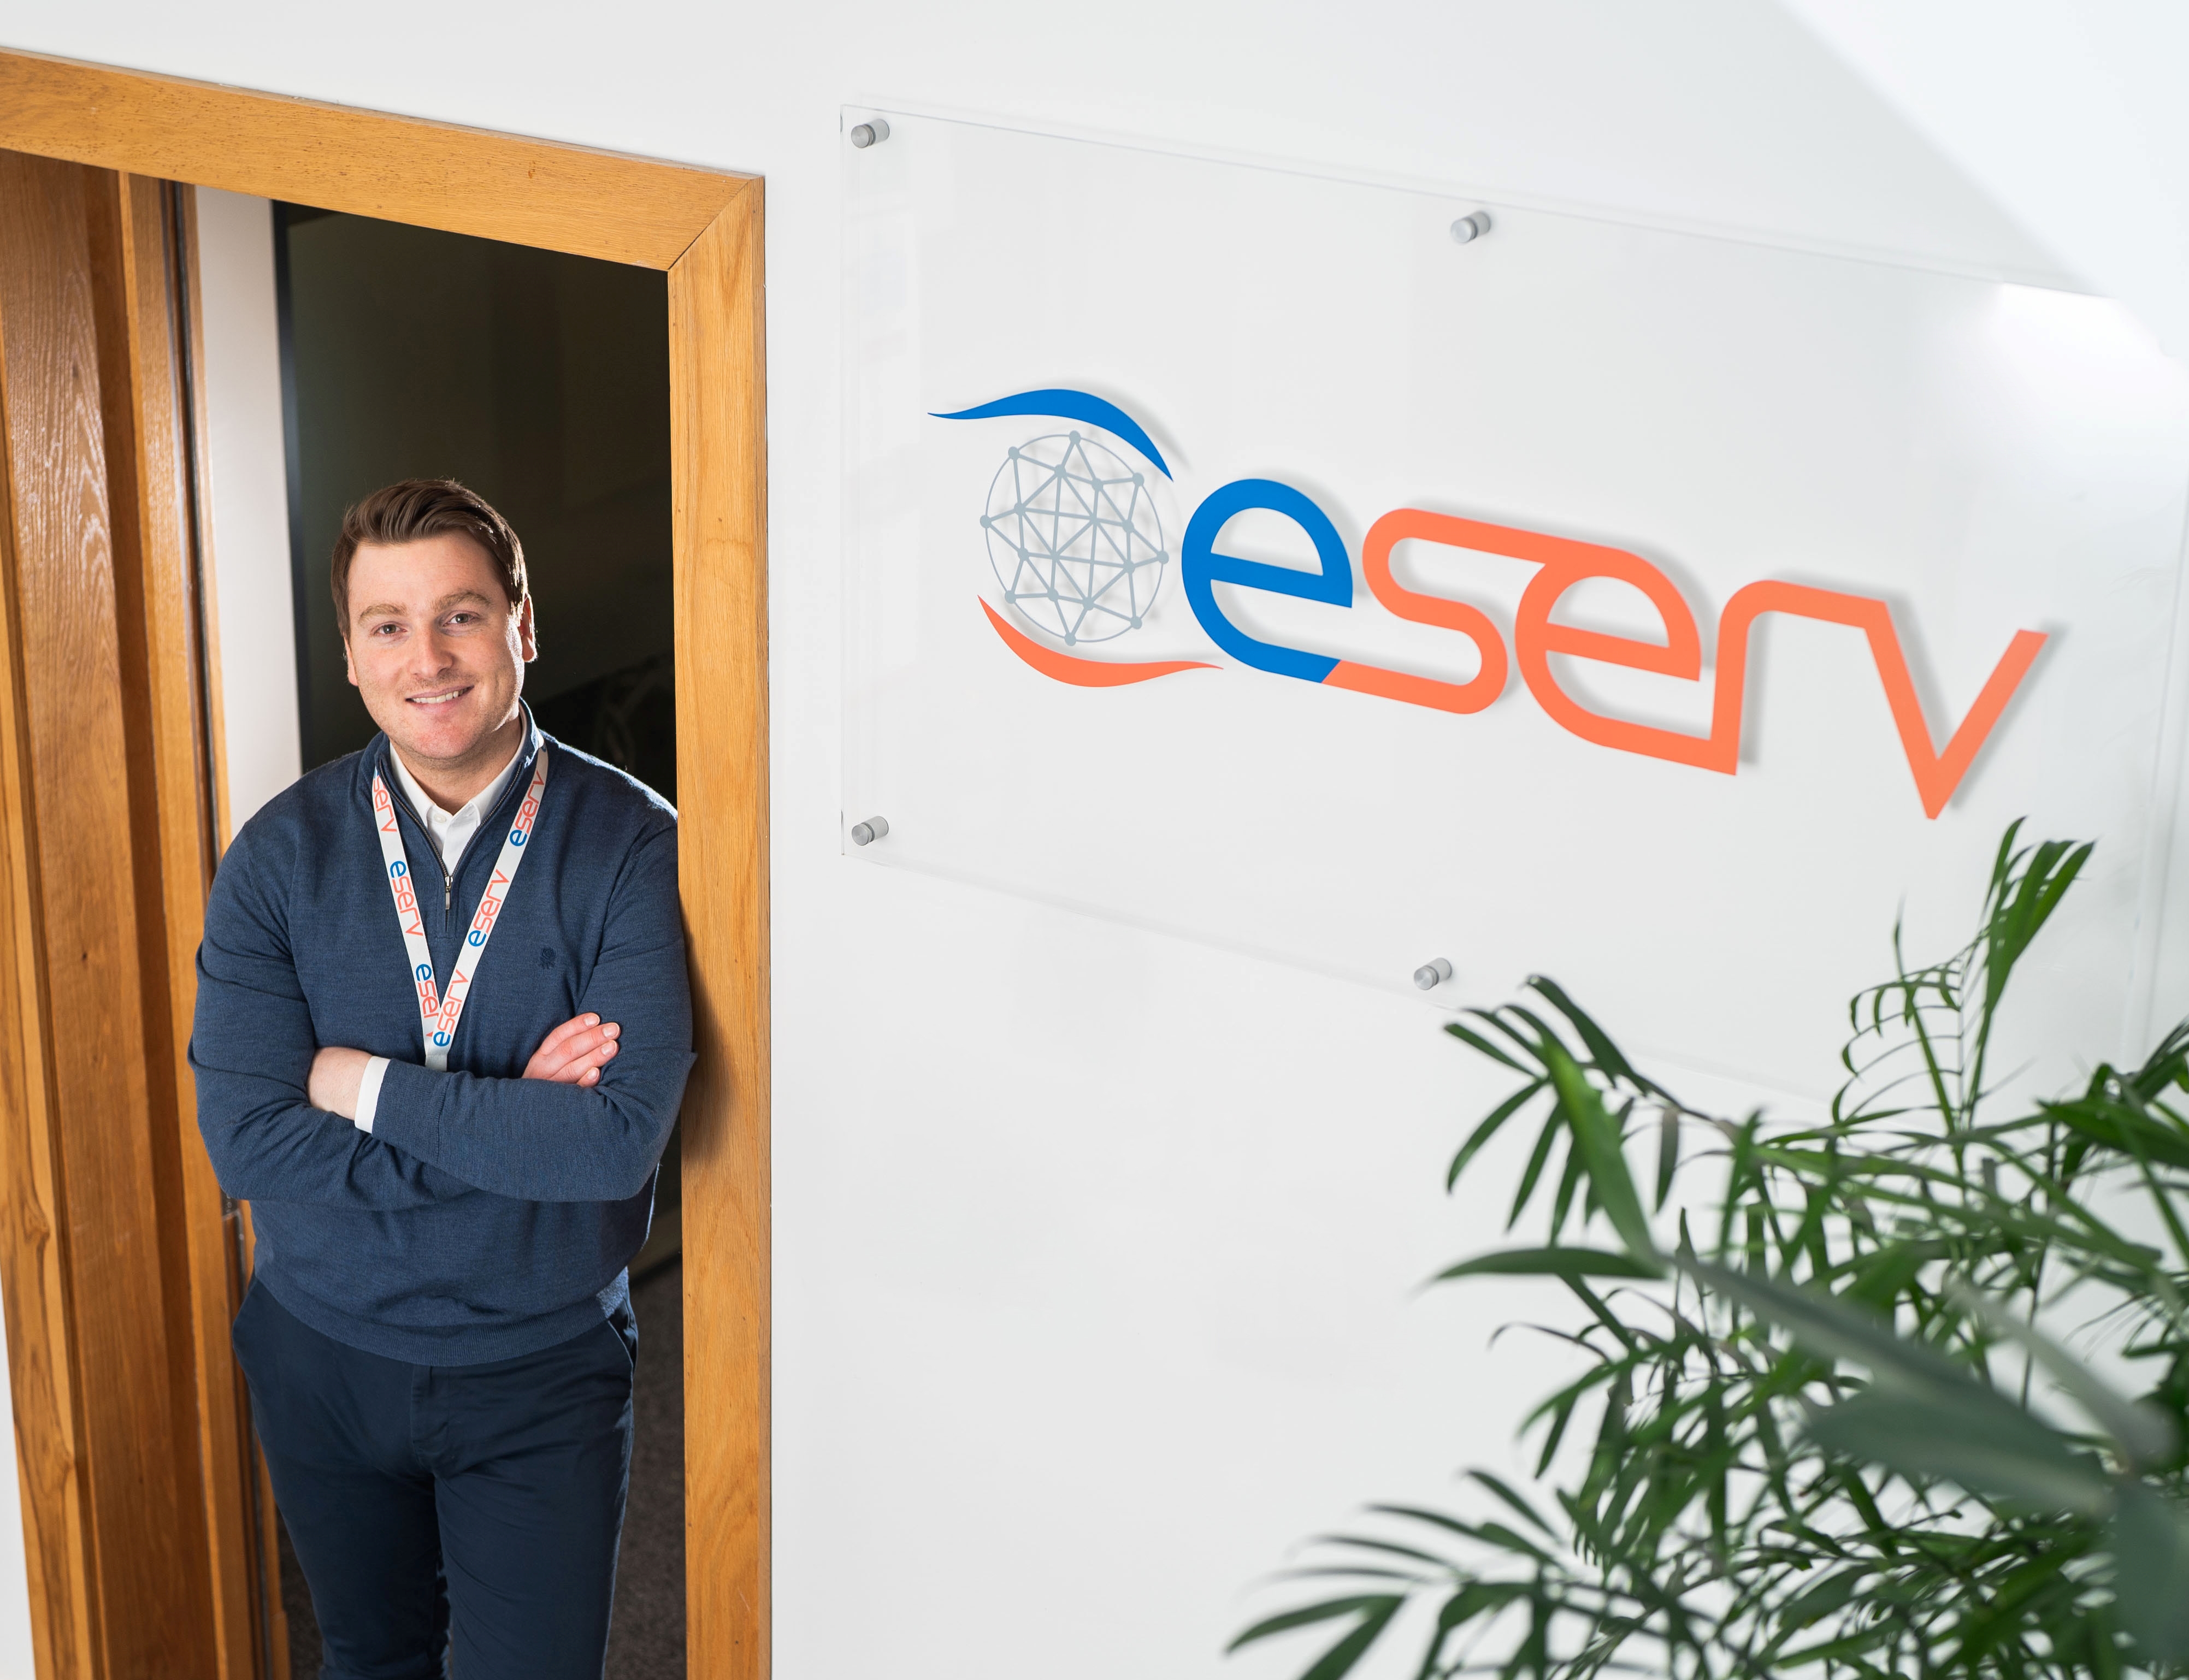 Eserv secures 3-year digital twin deal with Neptune Energy